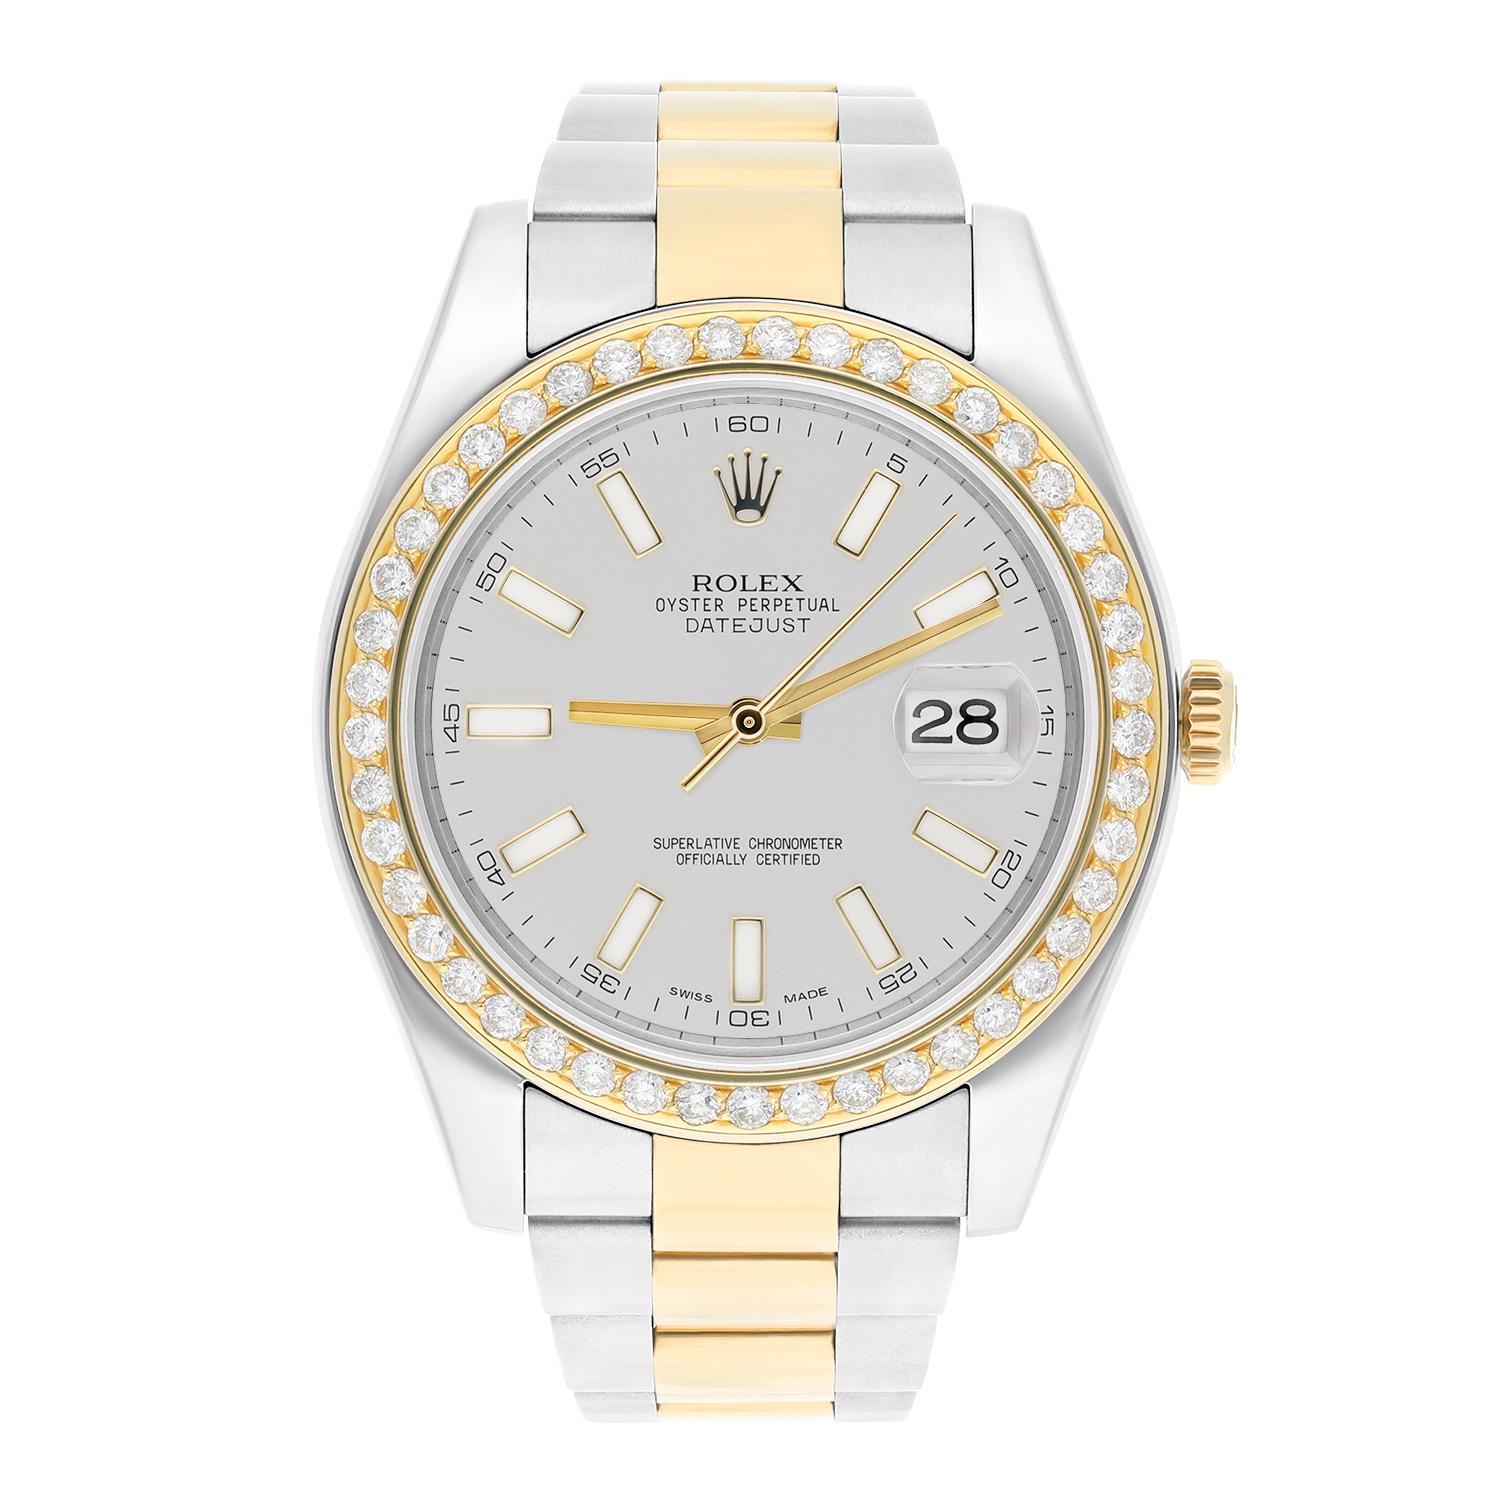 Brand: Rolex
Series: Datejust
Model: 116333
Case Diameter: 41 mm
Bracelet: Oyster band; stainless steel and 18K Yellow Gold
Bezel: Custom Diamond Set, 18K Gold Plated
Dial: Silver dial
The sale includes a jewelry watch box and an appraisal